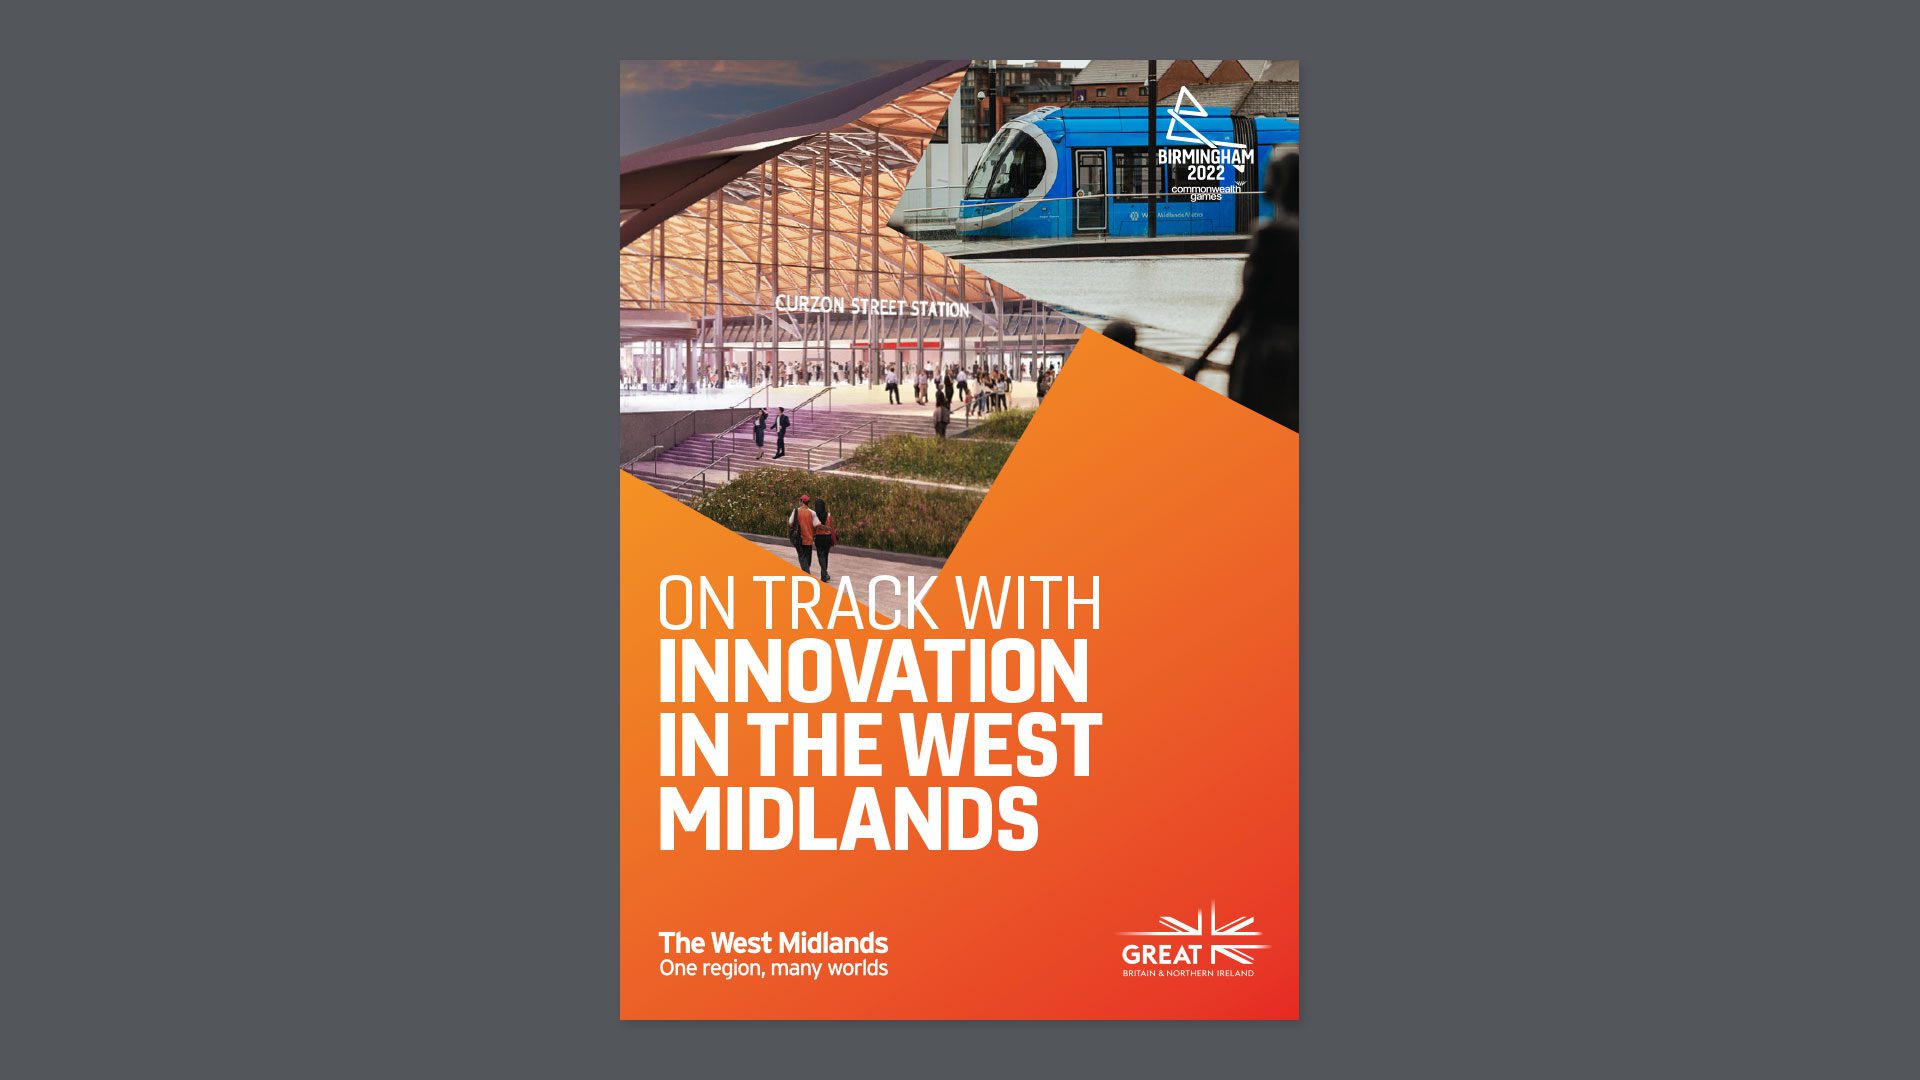 'On track with innovation in the West Midlands' brochure cover.